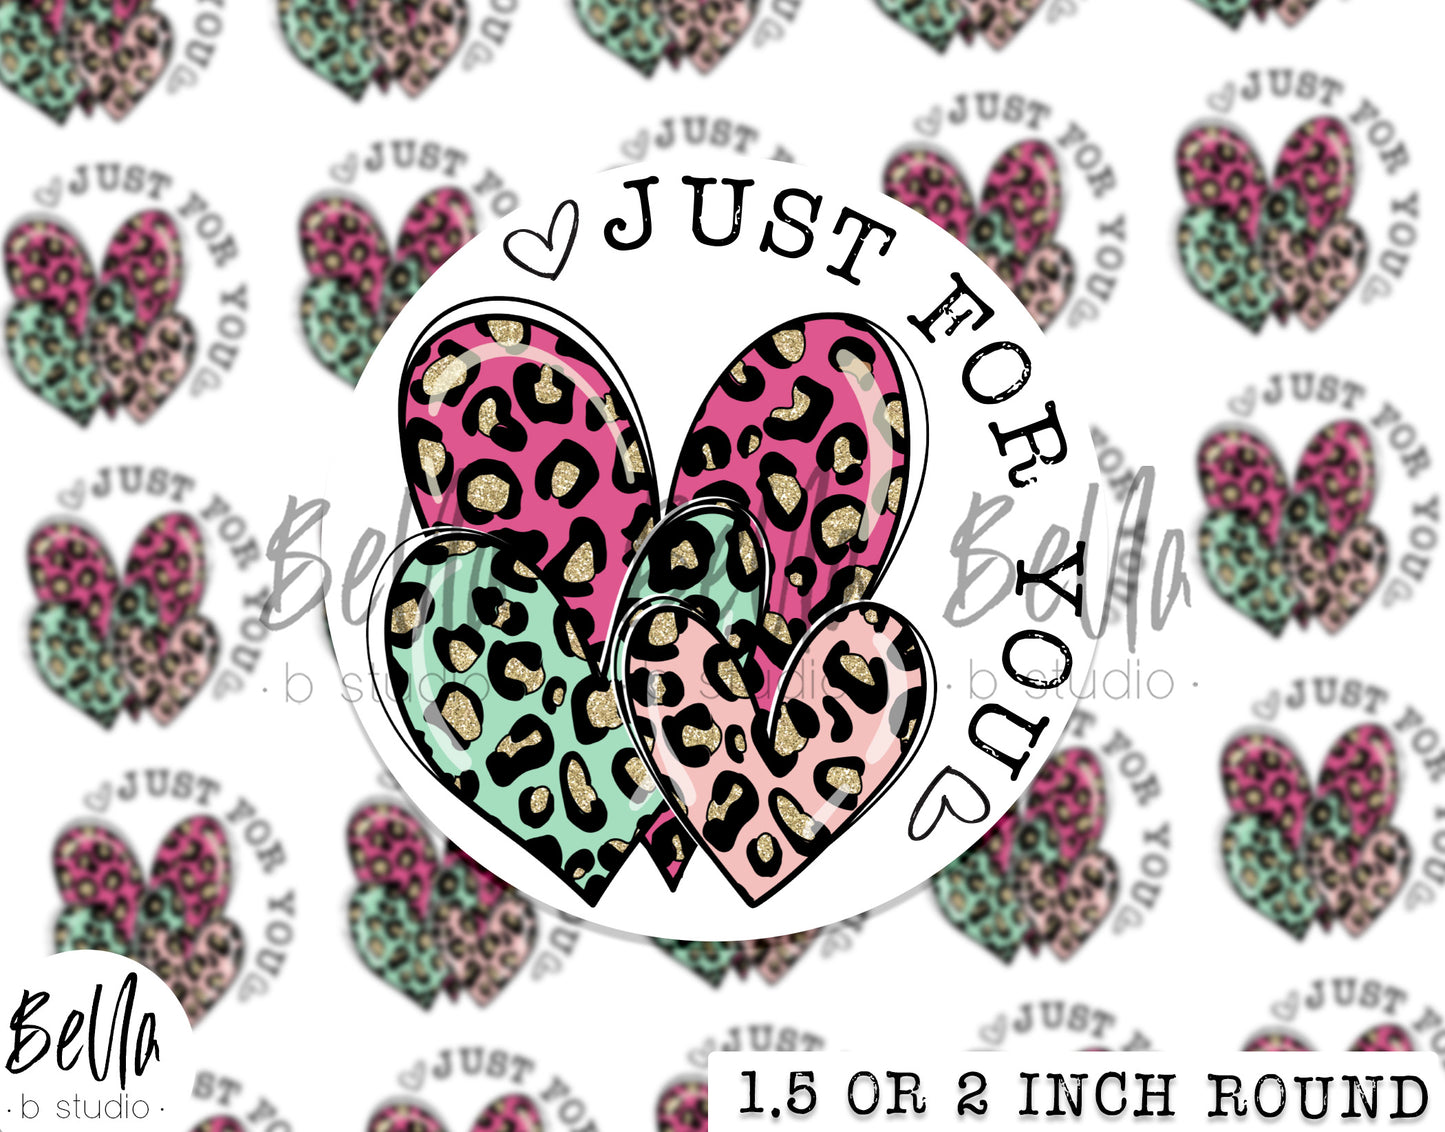 Bright Leopard Hearts -"Just For You" Sticker Sheet - Small Business Packaging Stickers